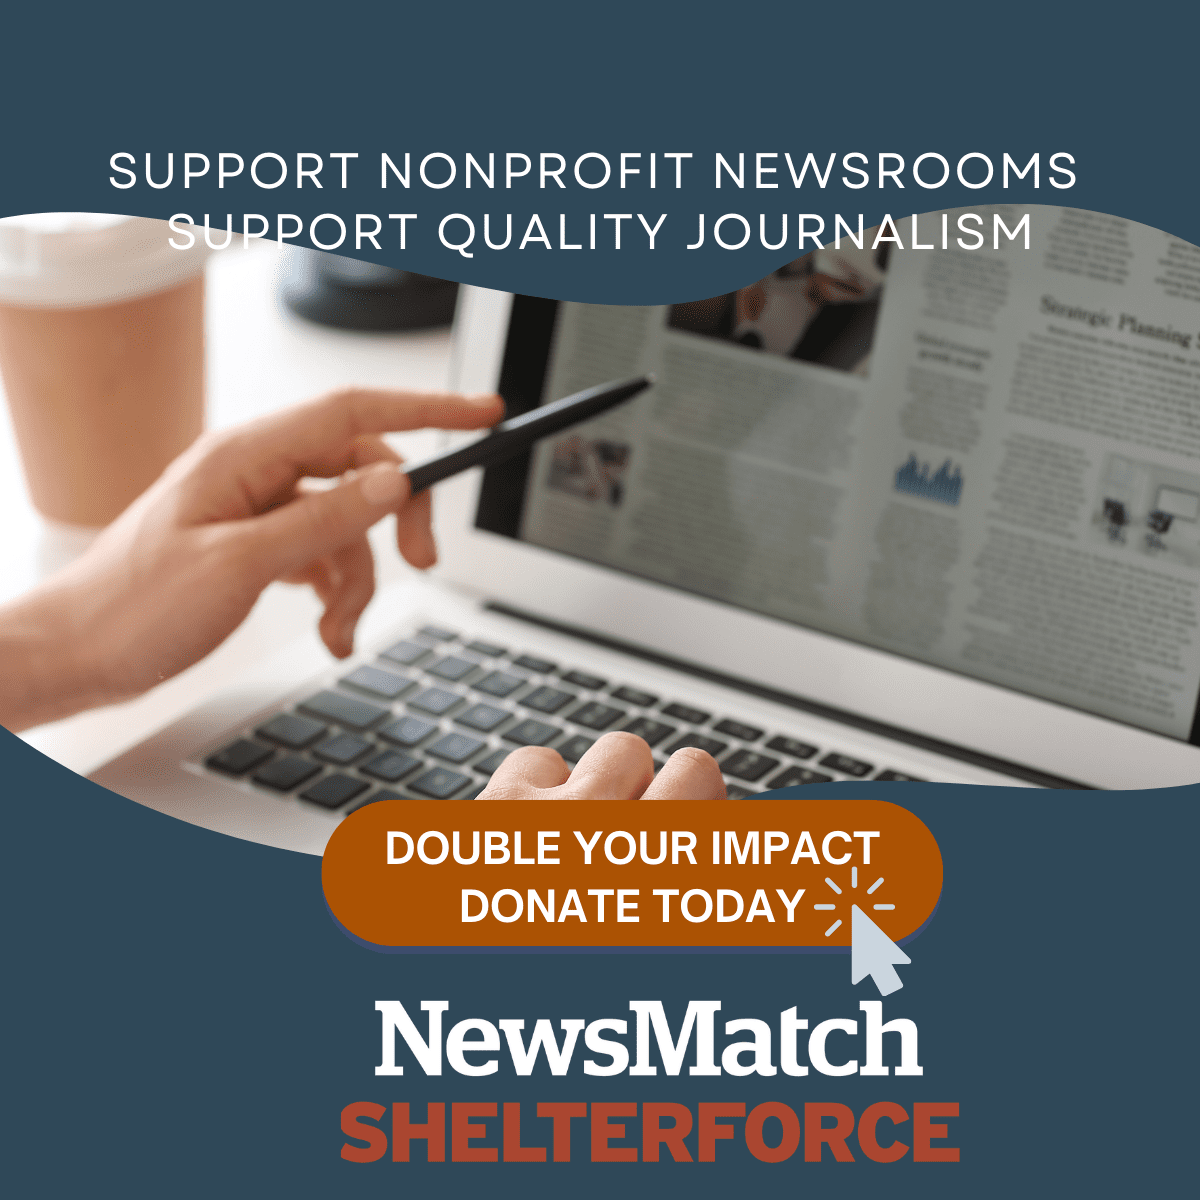 Ad ad that says, "Support nonprofit newsrooms. Support quality journalism. Double Your Impact. Donate Today."